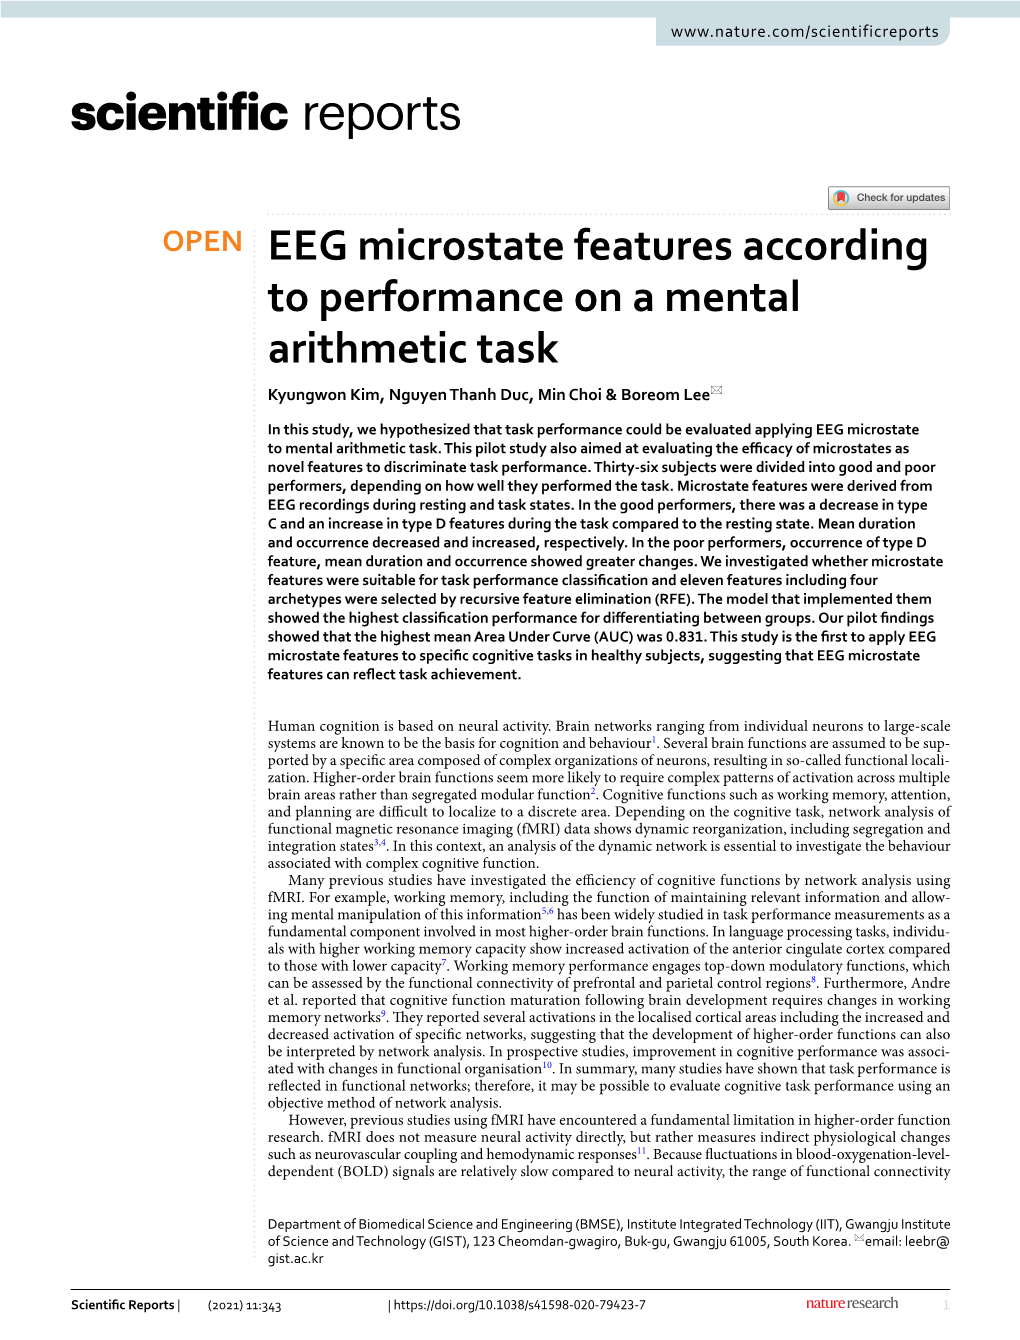 EEG Microstate Features According to Performance on a Mental Arithmetic Task Kyungwon Kim, Nguyen Thanh Duc, Min Choi & Boreom Lee*